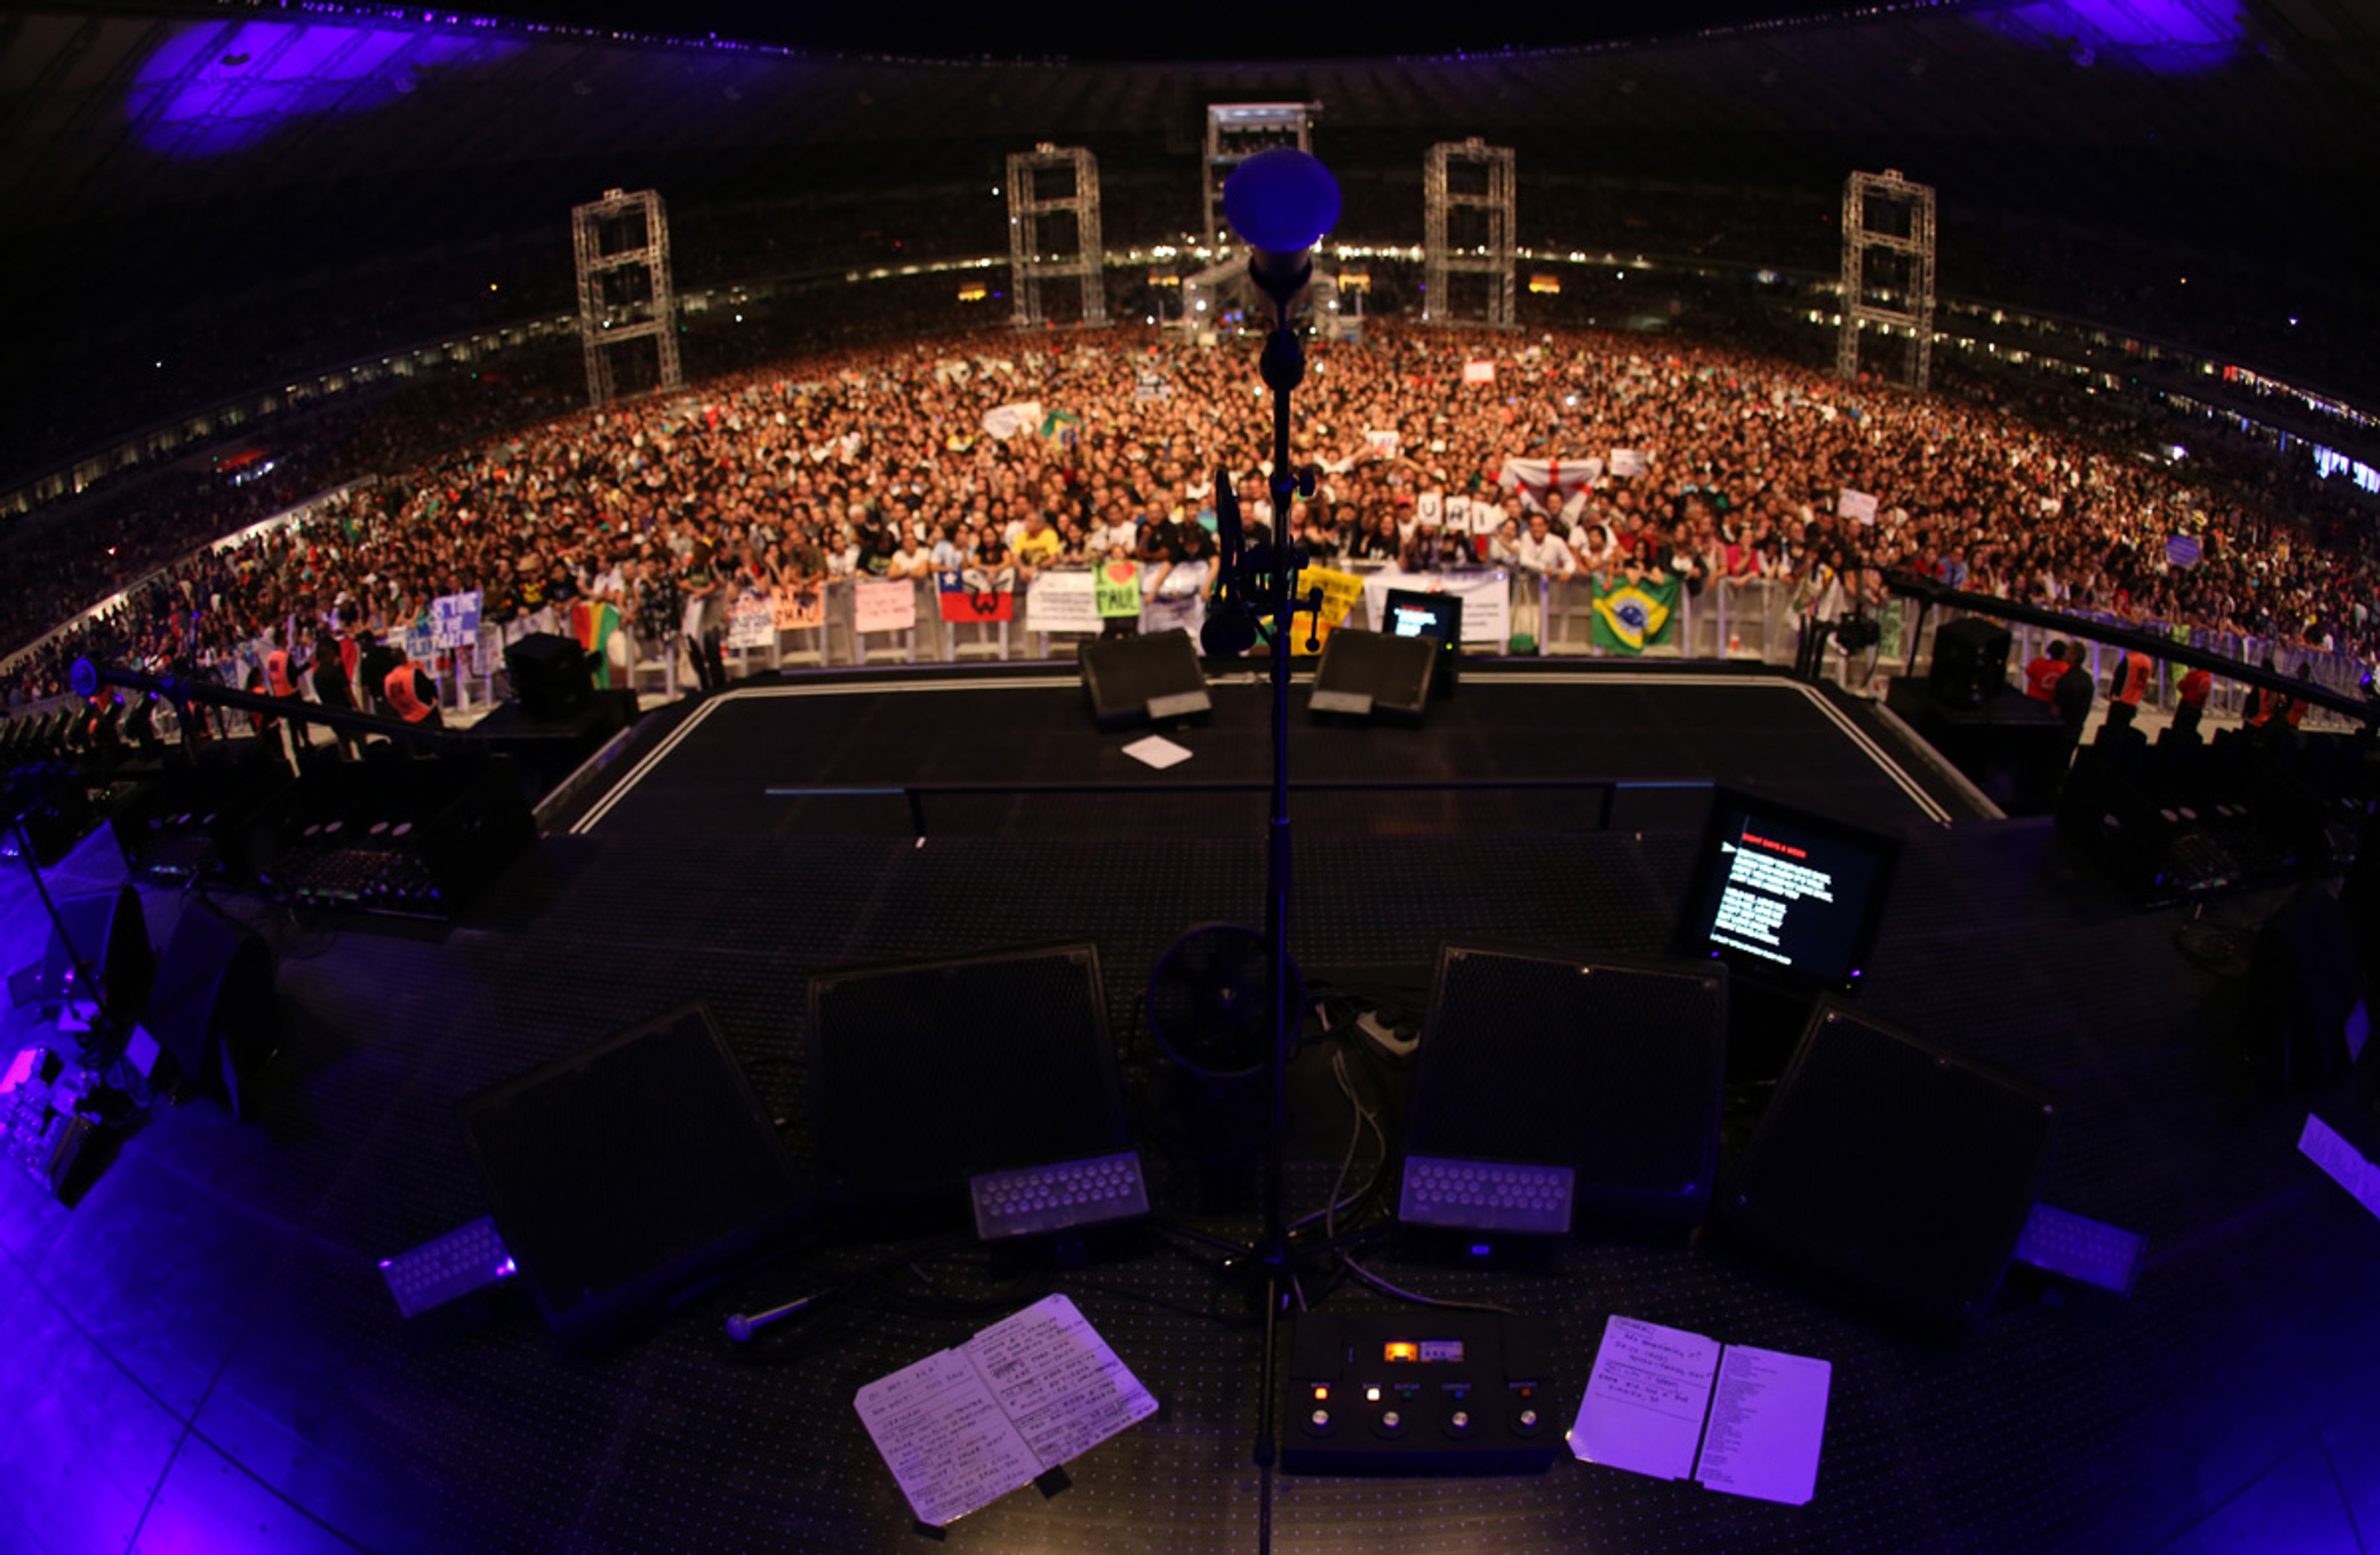 The view from Paul's microphone, Belo Horizonte, Brazil, 4th May 2013